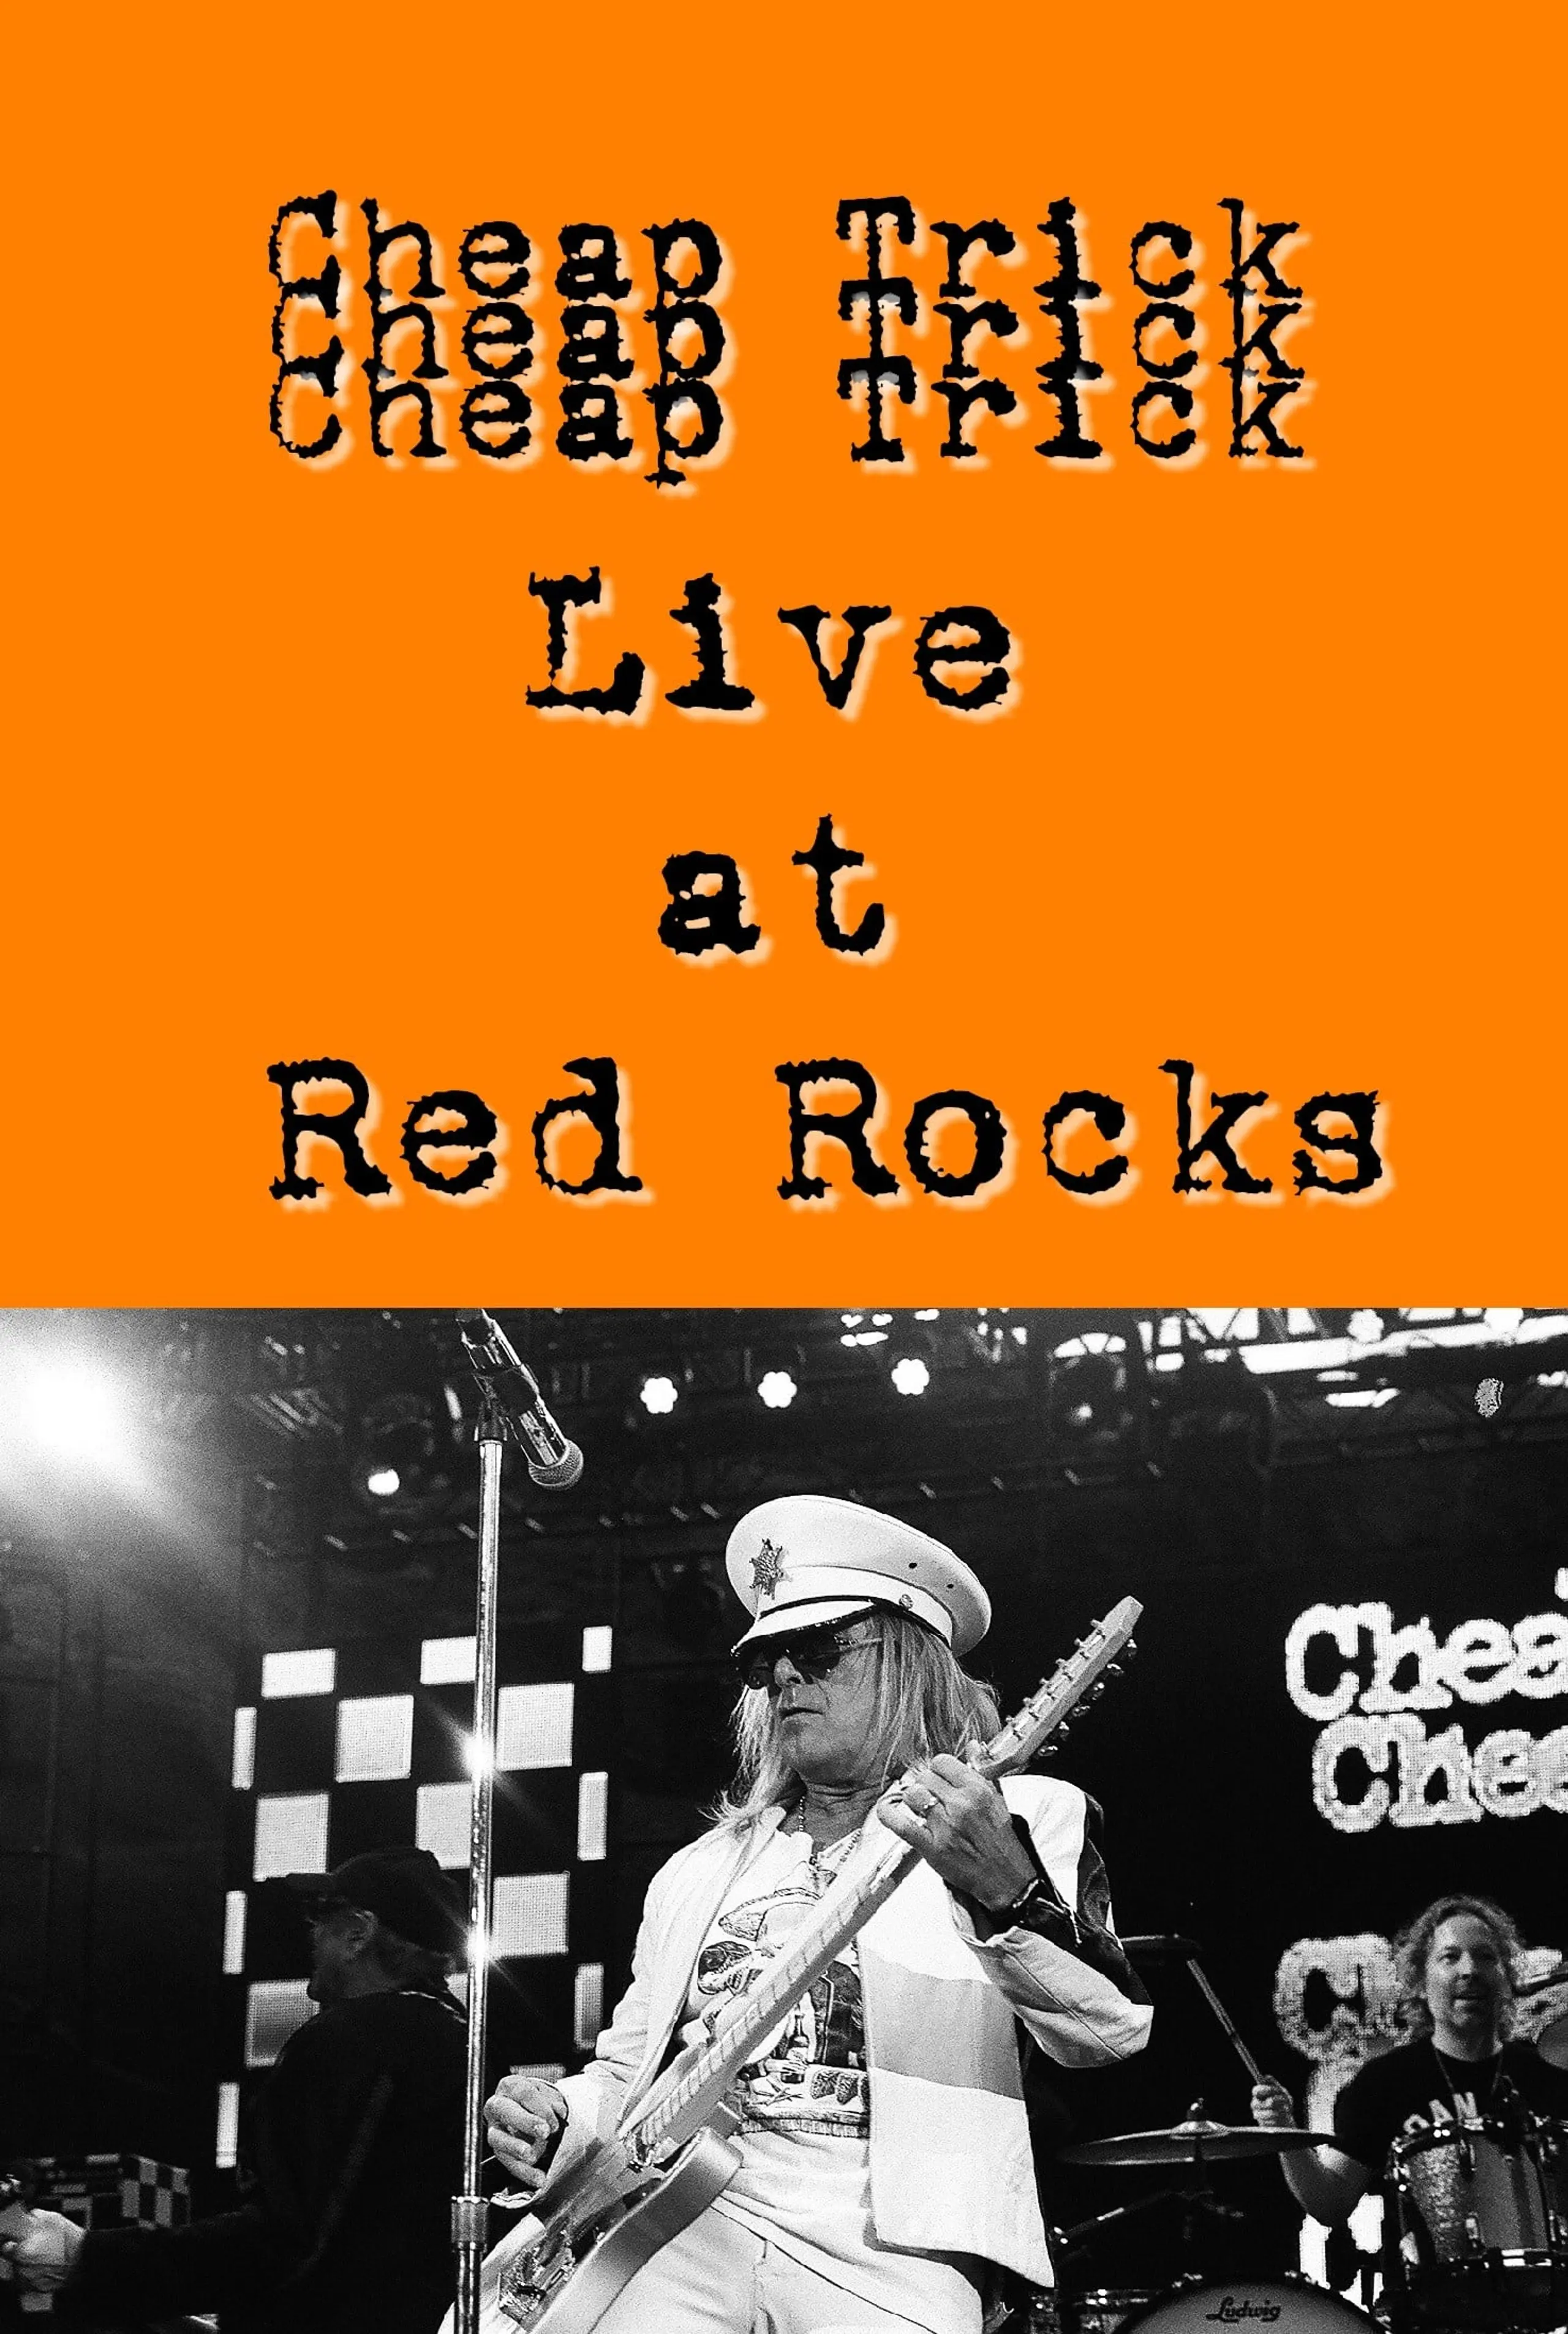 Cheap Trick Live at Red Rocks